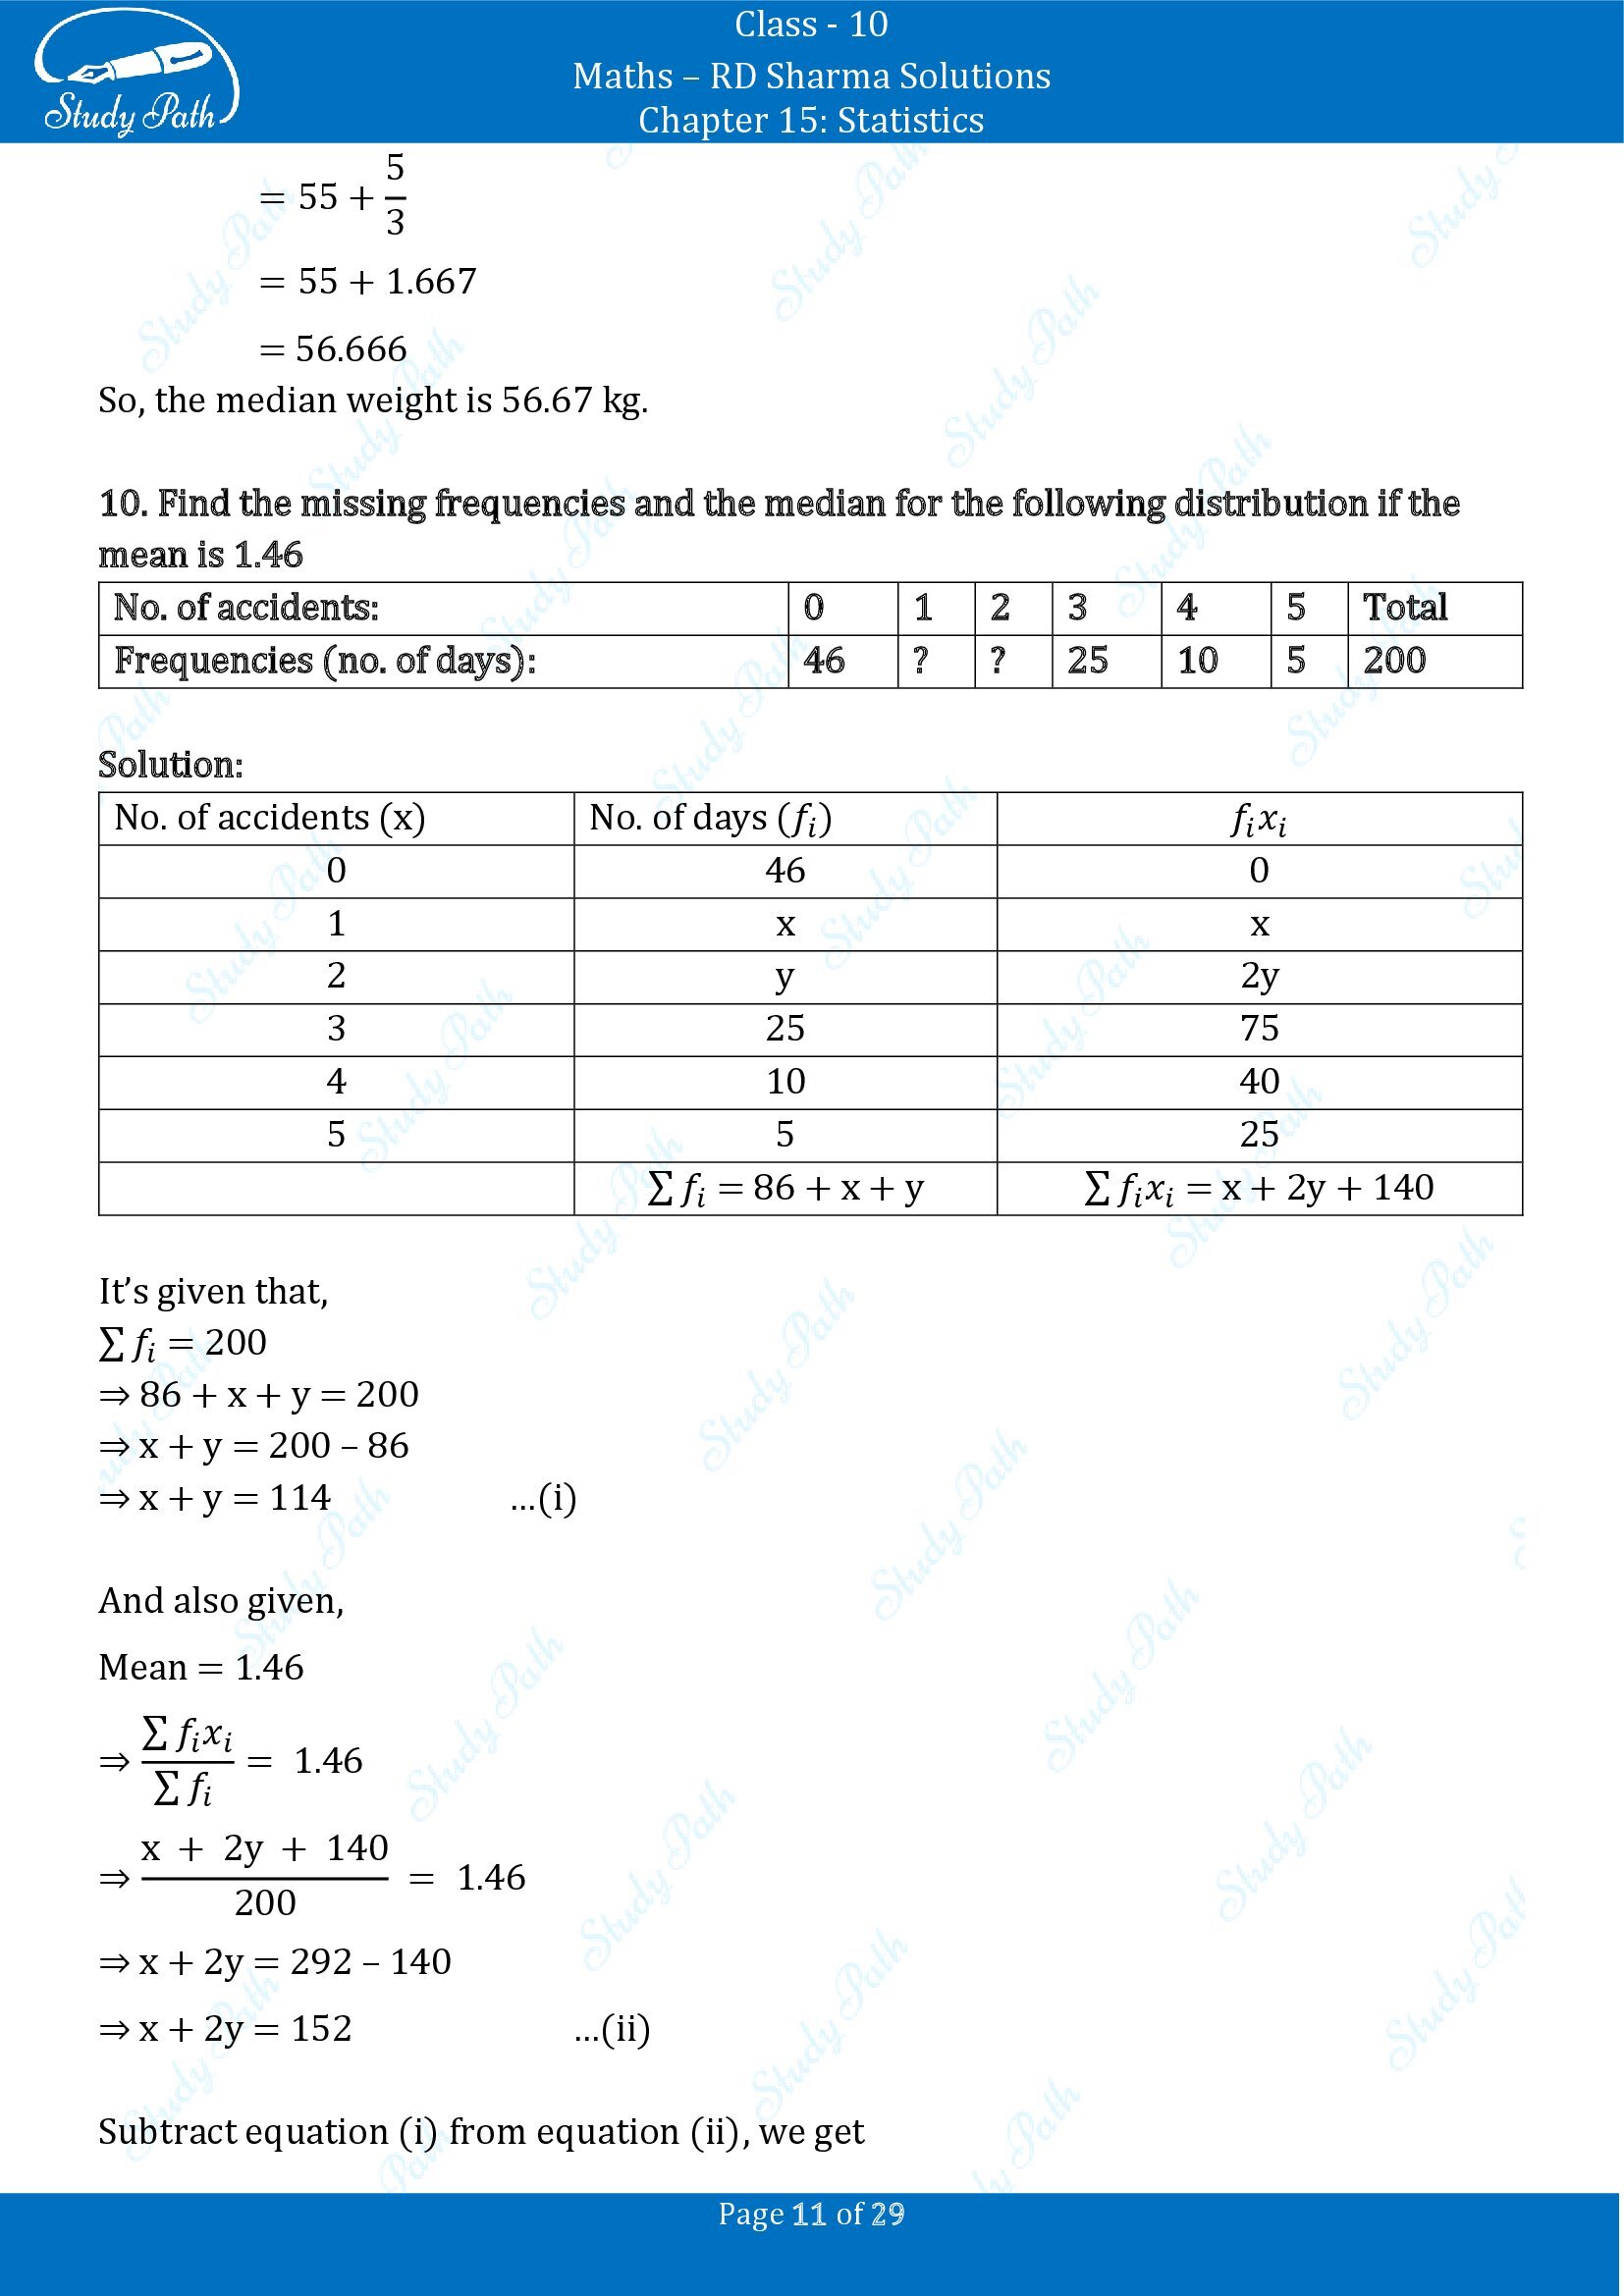 RD Sharma Solutions Class 10 Chapter 15 Statistics Exercise 15.4 00011